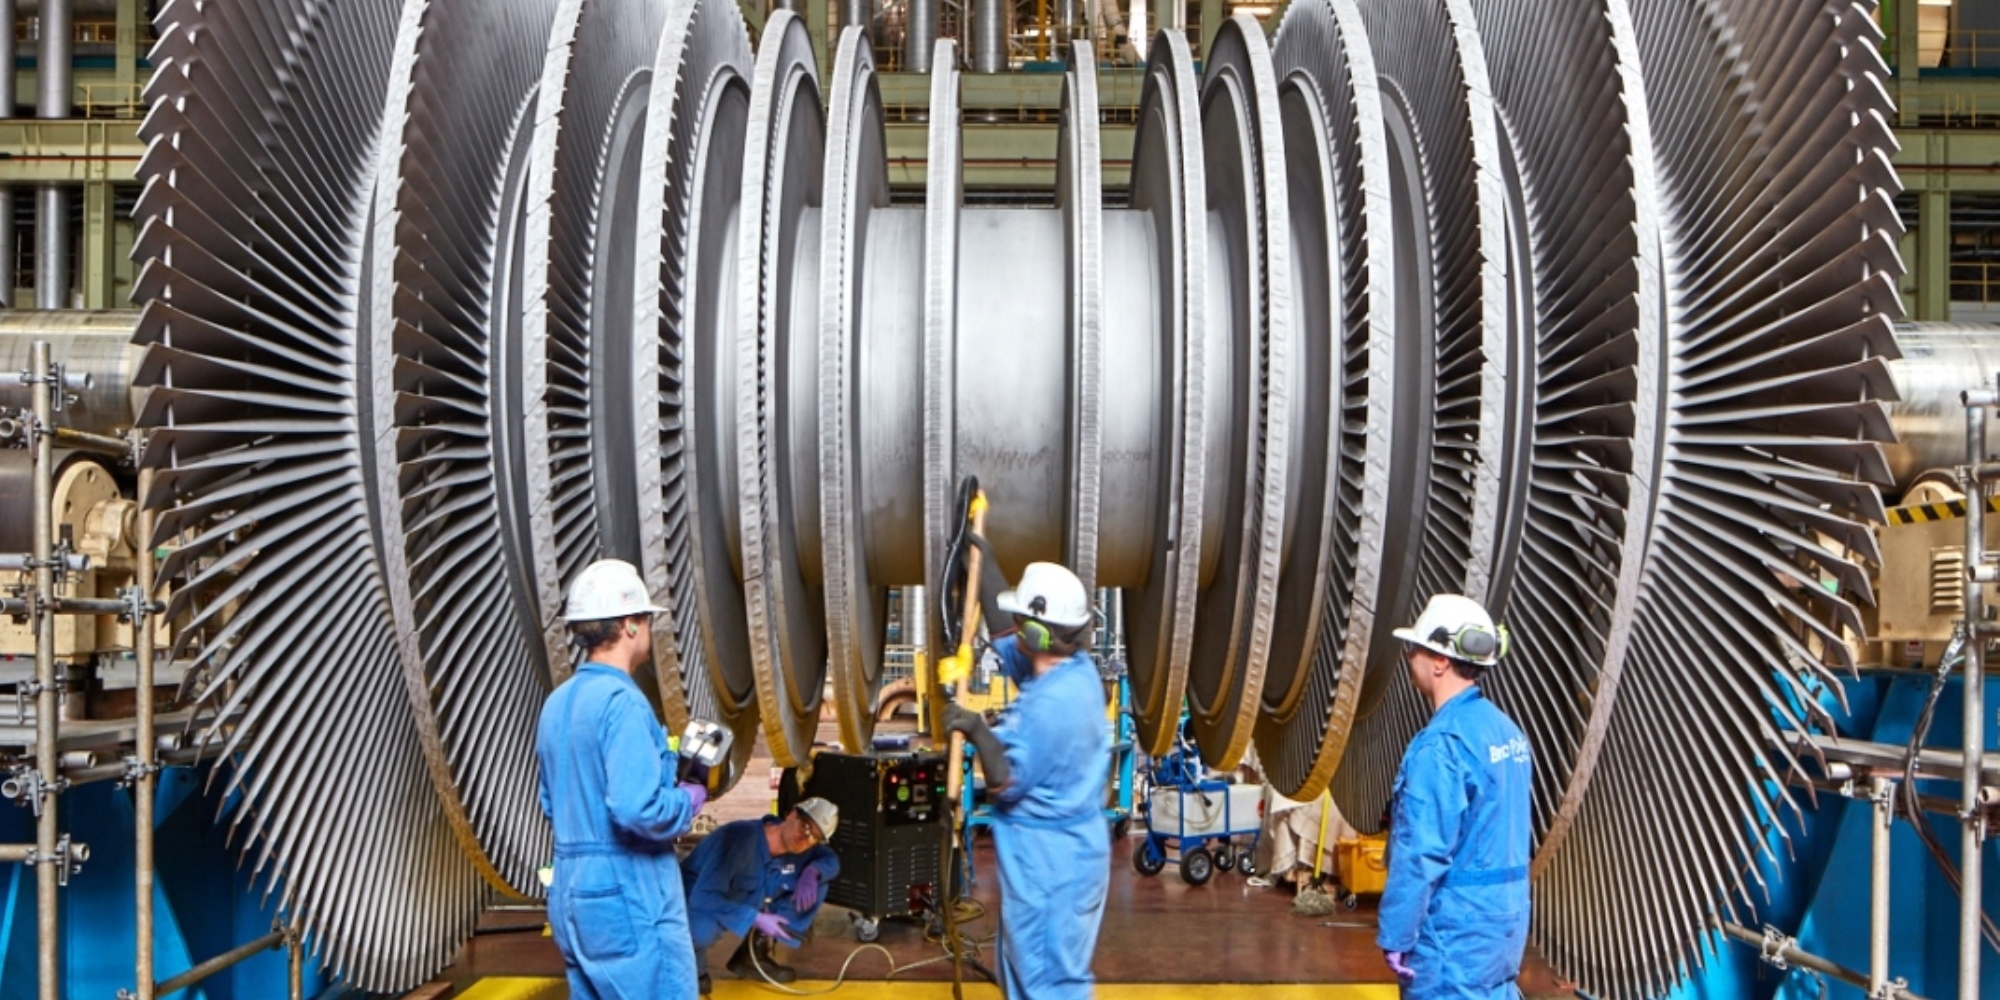 Employees in front of turbine rotor